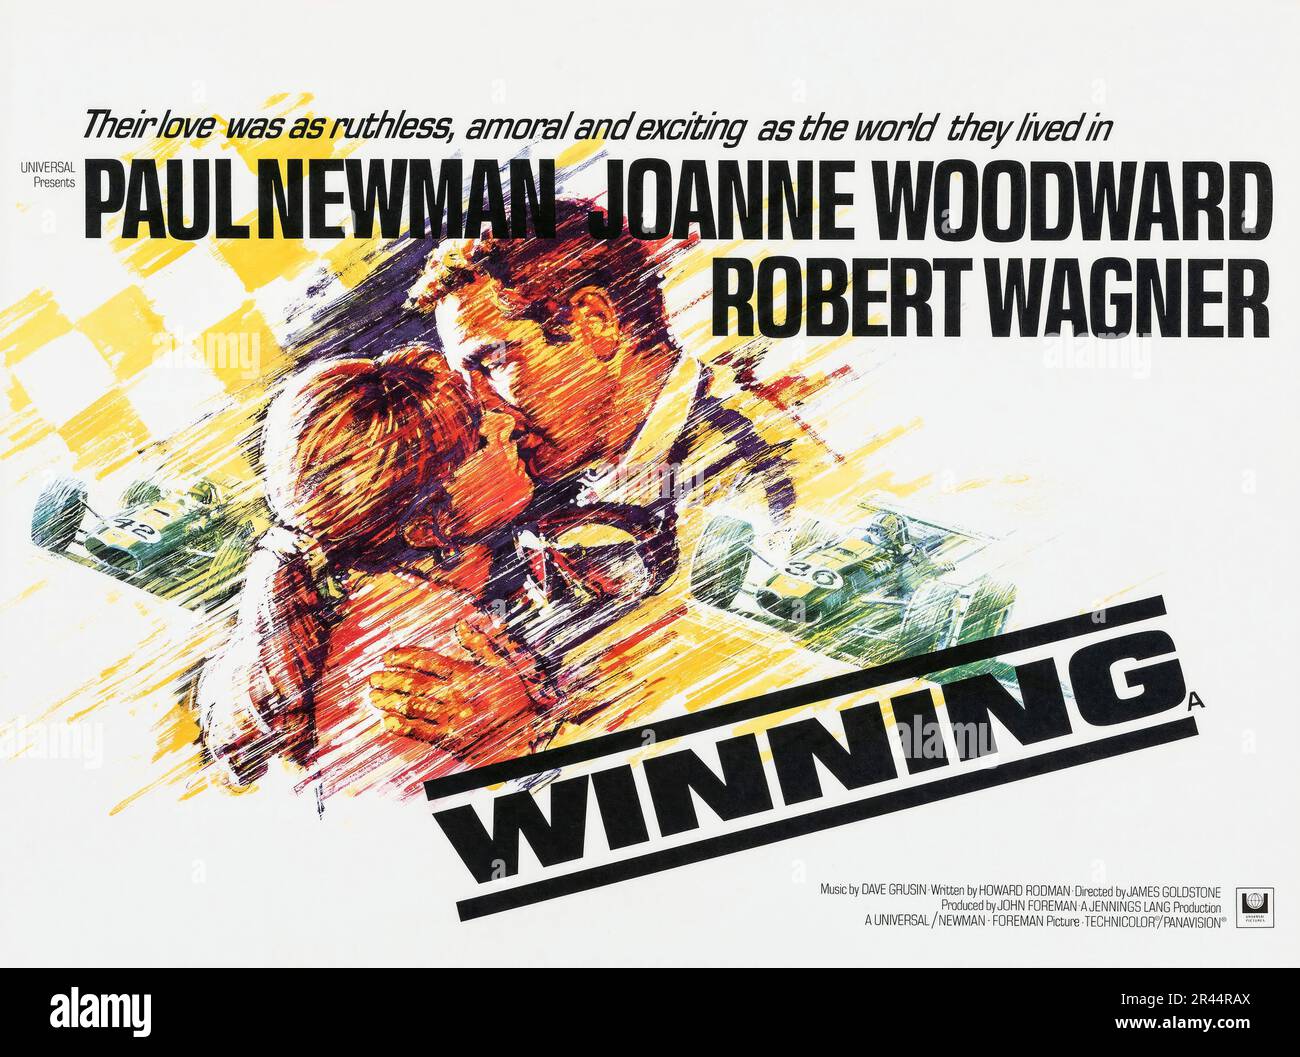 WINNING (1969), directed by JAMES GOLDSTONE. Credit: UNIVERSAL PICTURES / Album Stock Photo